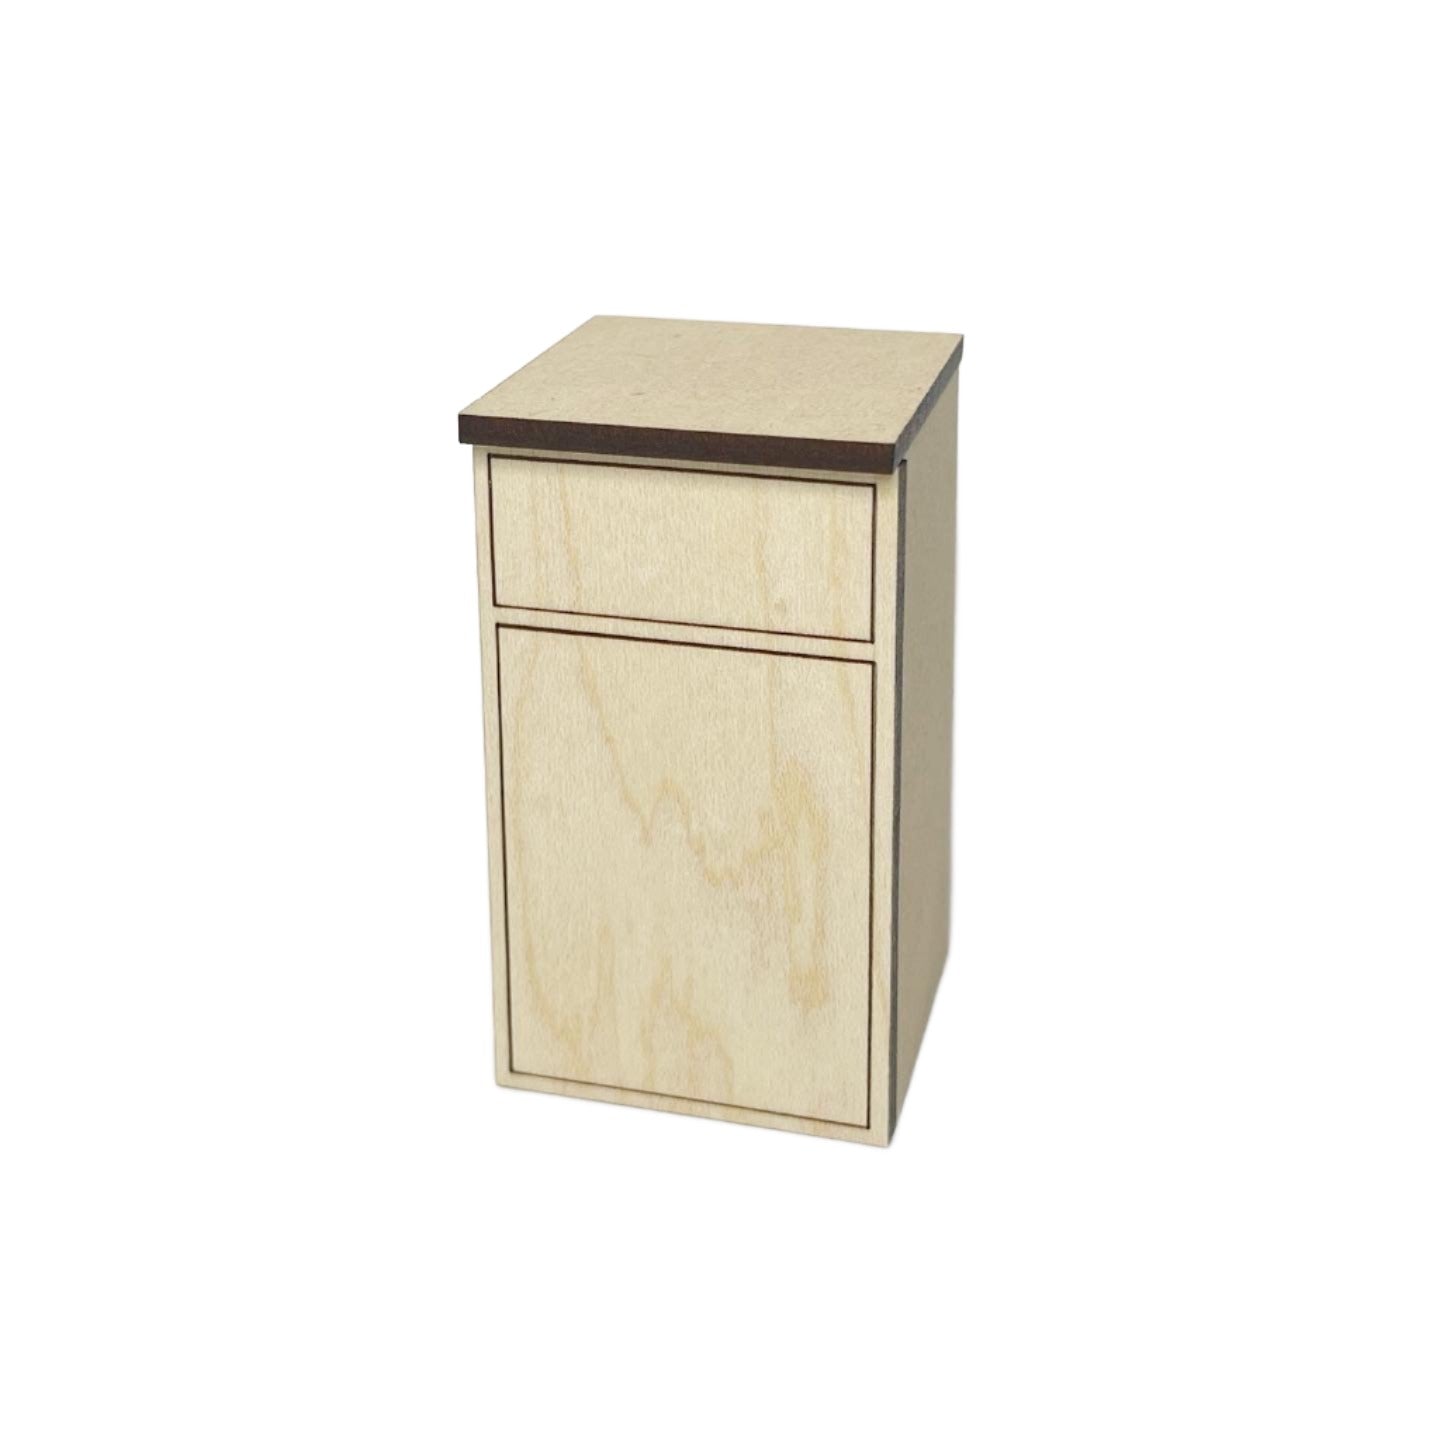 Single Lower Cabinet with Doors, Standard